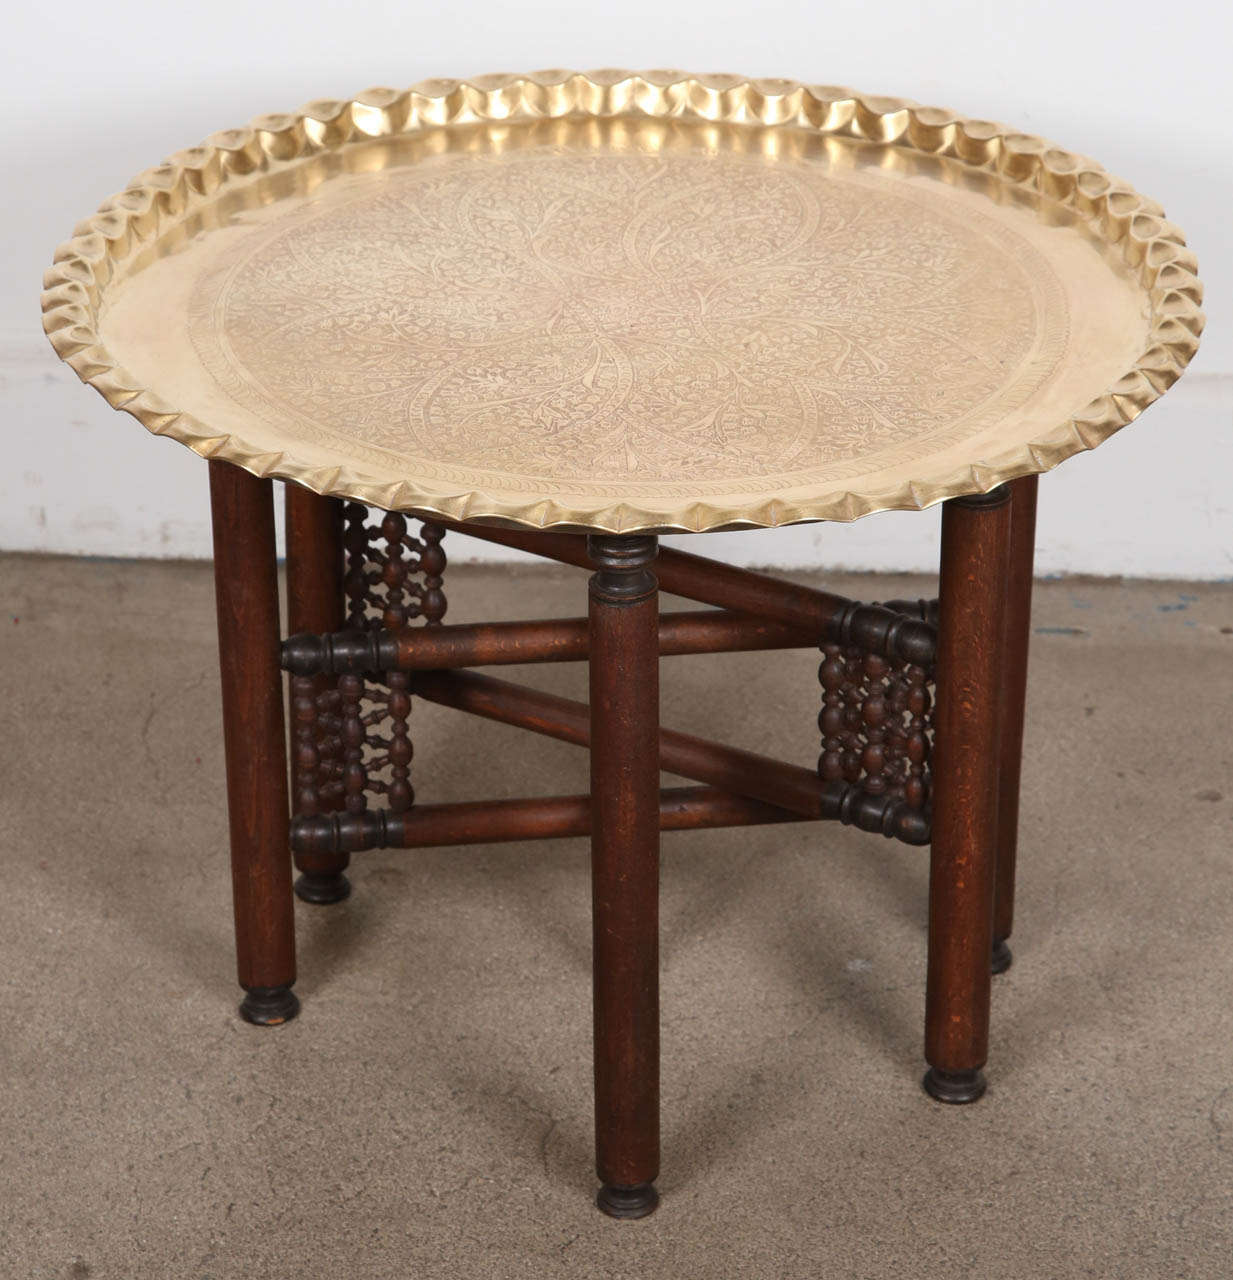 Vintage occasional Moroccan etched brass large round tray table.
Removable etched brass tray table with Moroccan Mahogany six leg base, fold down to flat. Brass top is etched with floral designs and has pie crust edging.
This is a wonderful